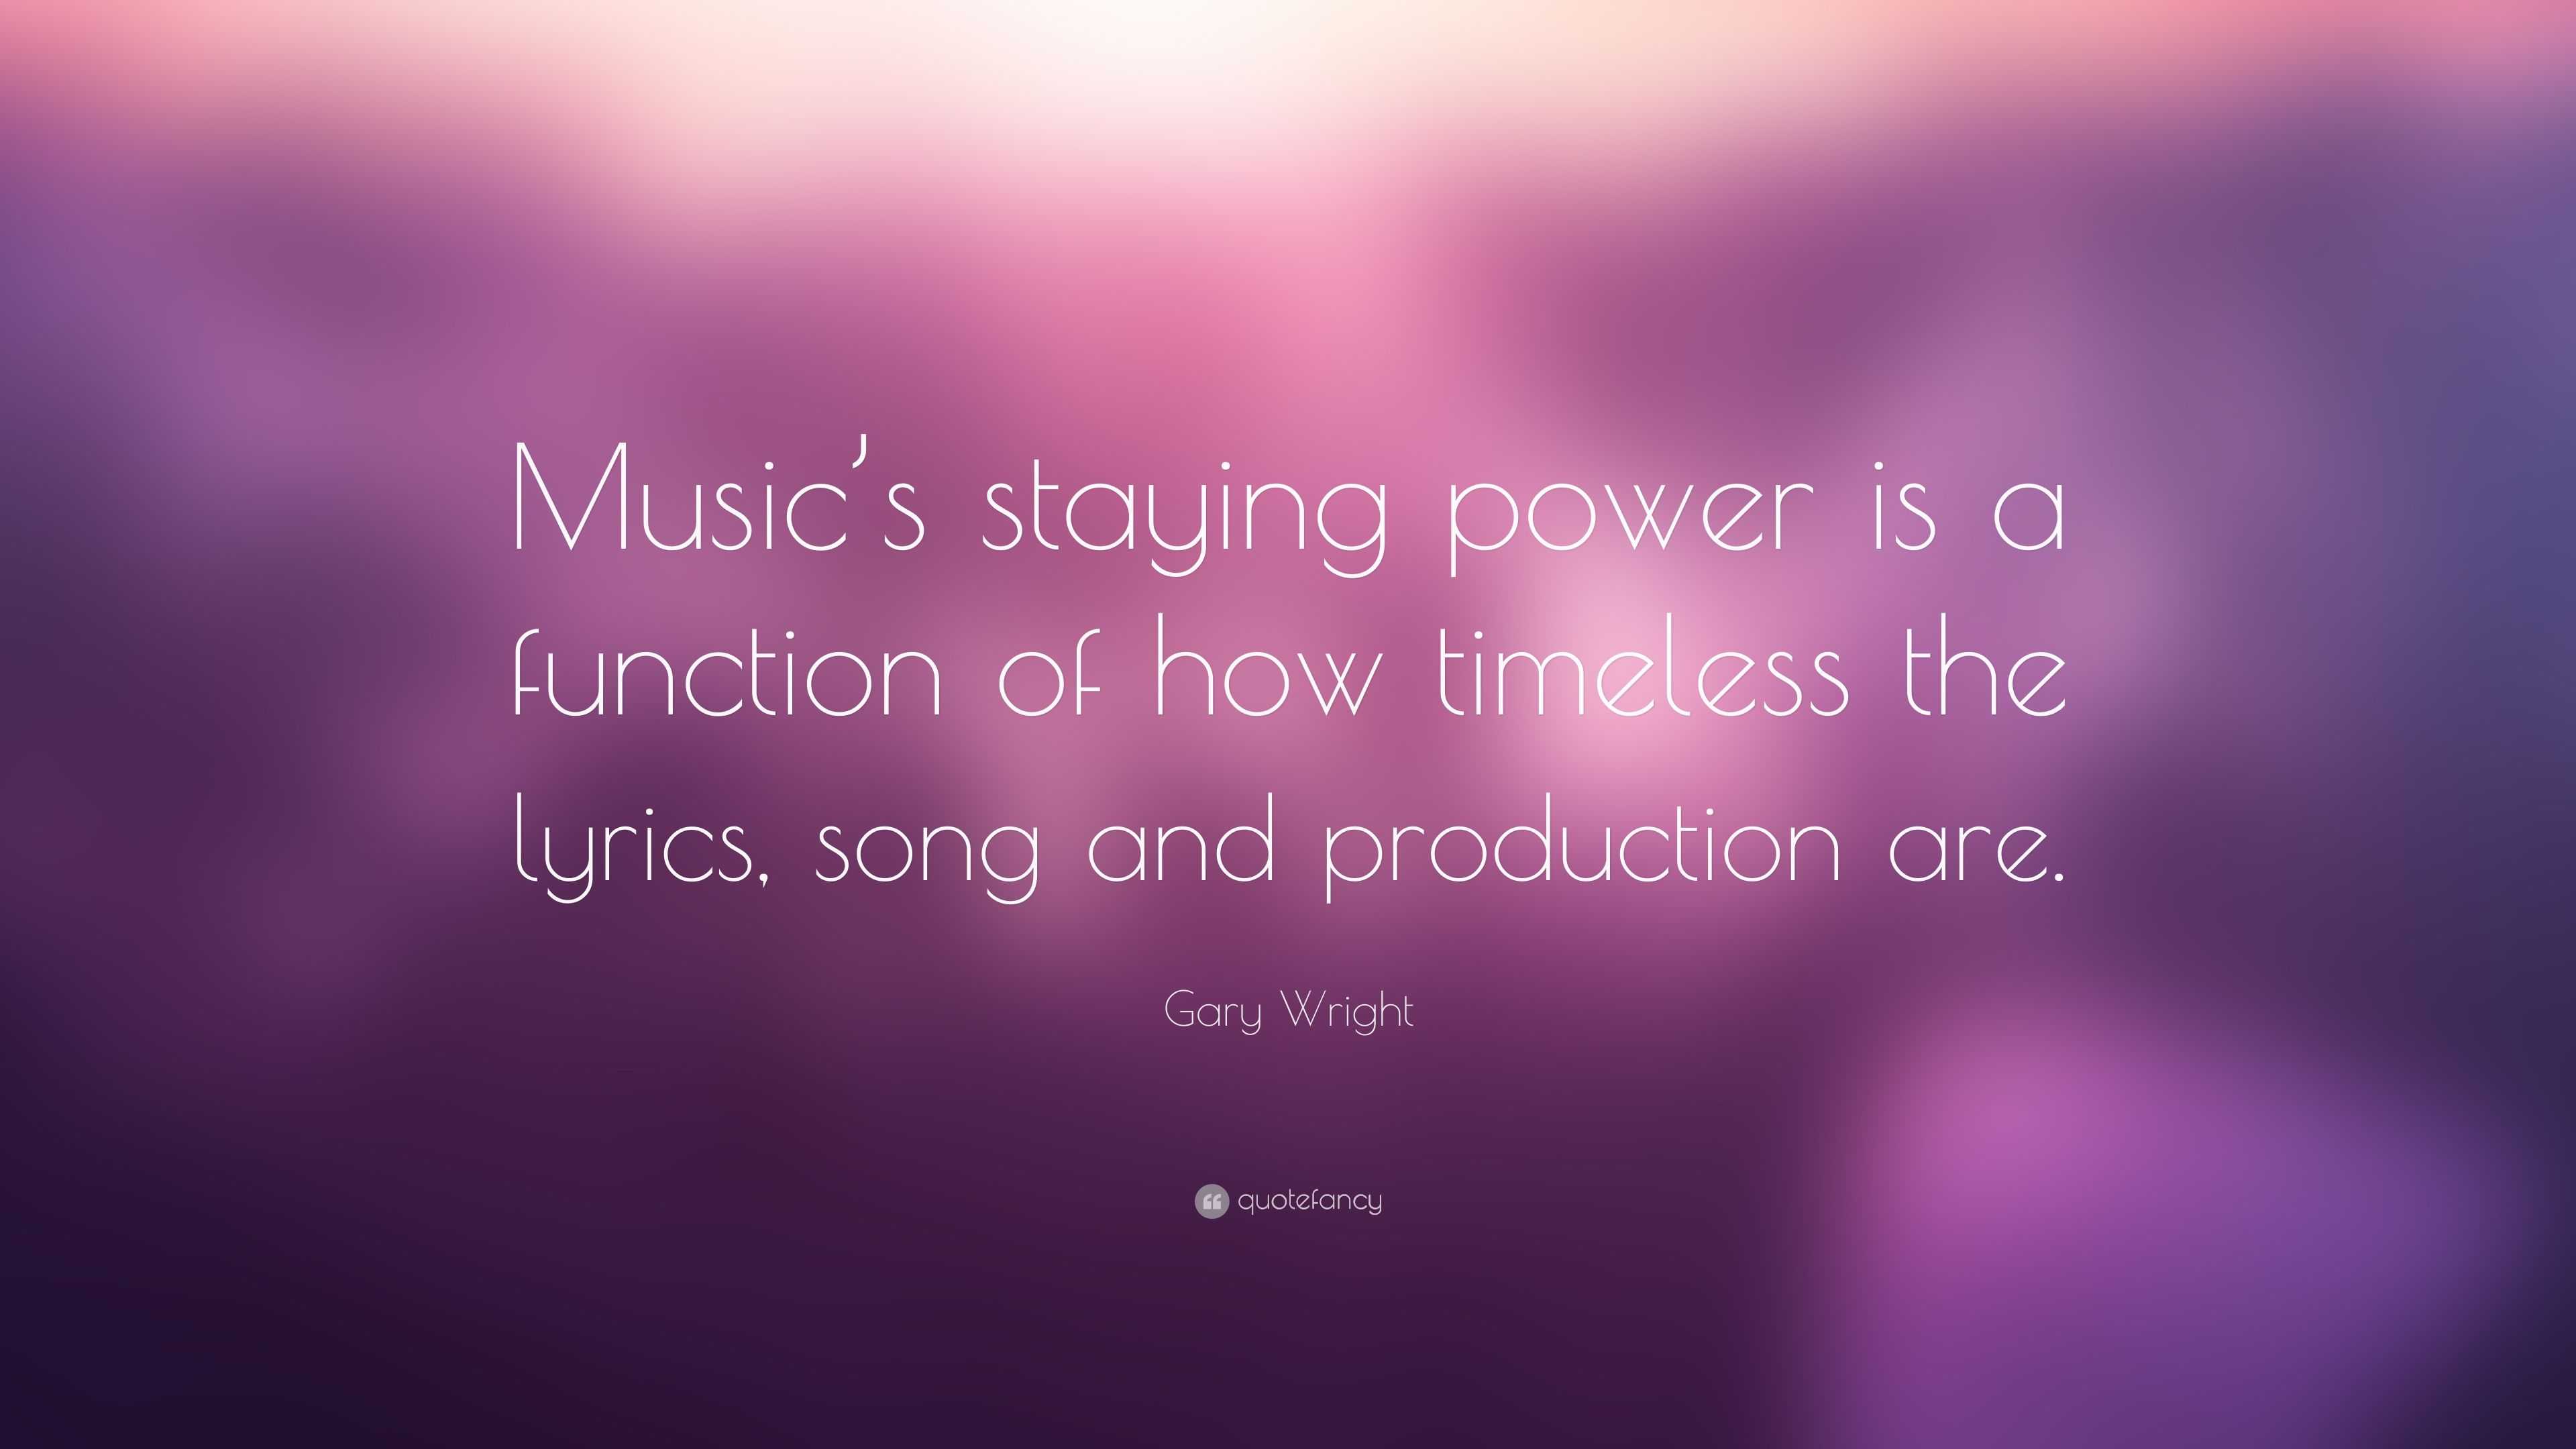 https://quotefancy.com/media/wallpaper/3840x2160/5469035-Gary-Wright-Quote-Music-s-staying-power-is-a-function-of-how.jpg